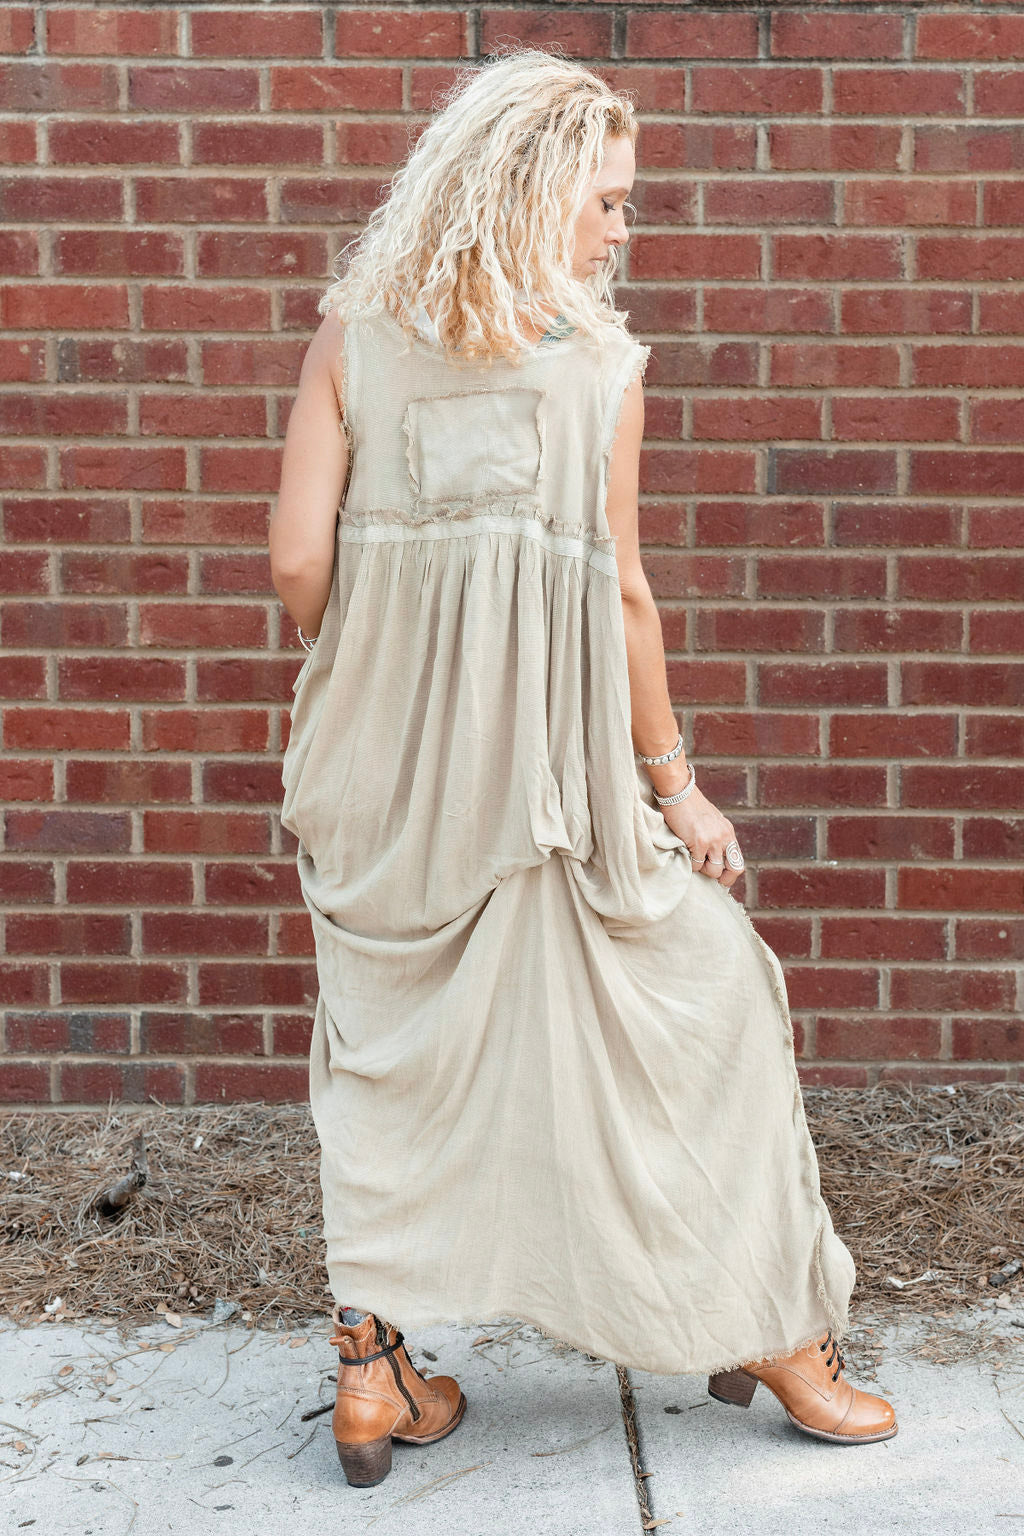 Load image into Gallery viewer, The Haystack Dress in Tan - SpiritedBoutiques Boho Hippie Boutique Style Dress, A Rare Bird
